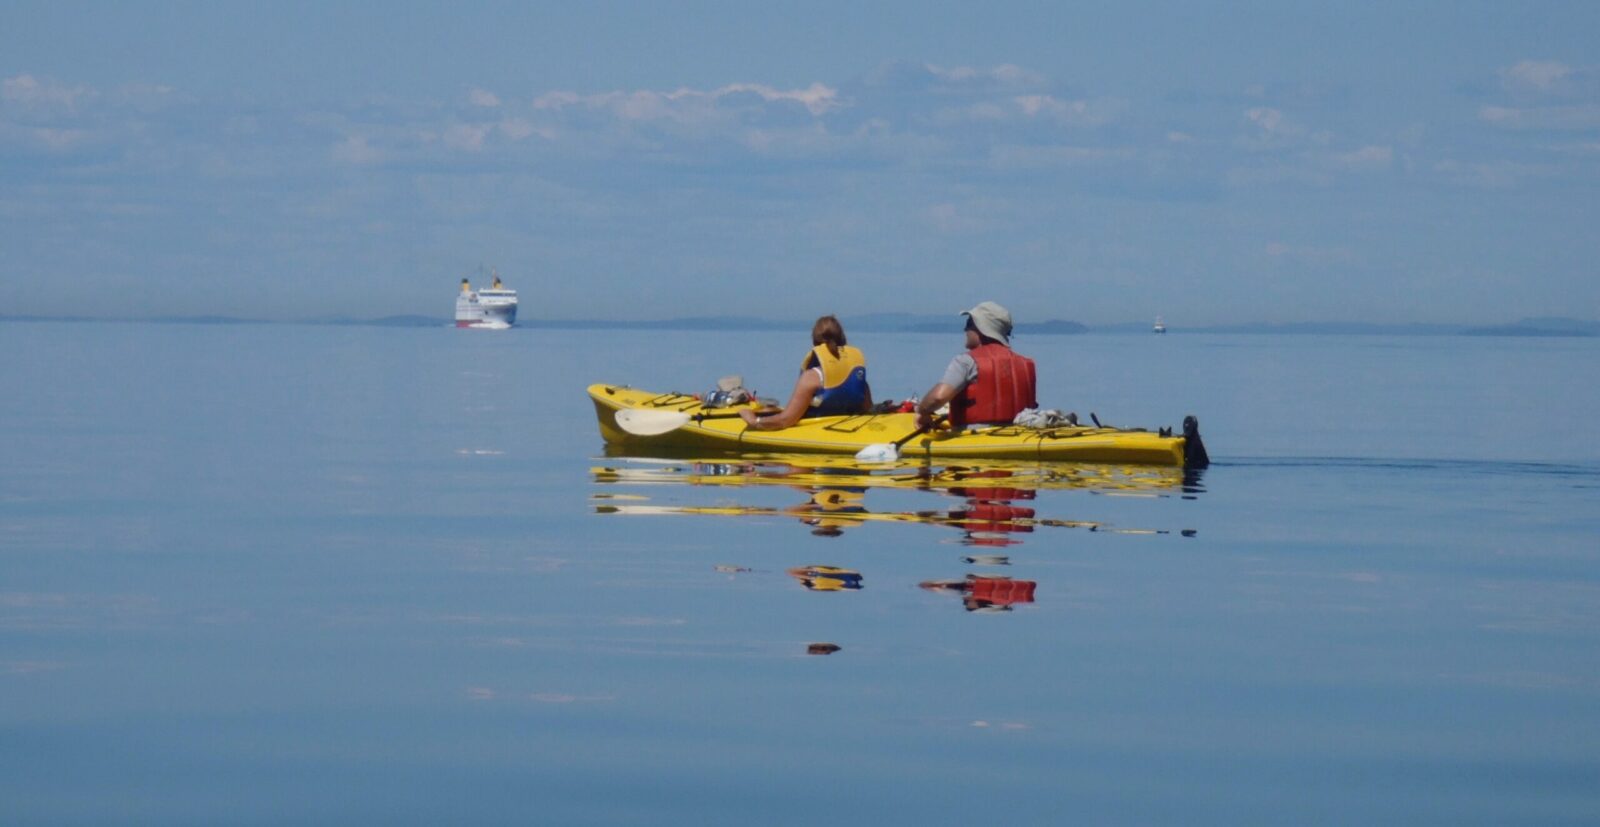 Two people paddling in a yellow kayak on the water.